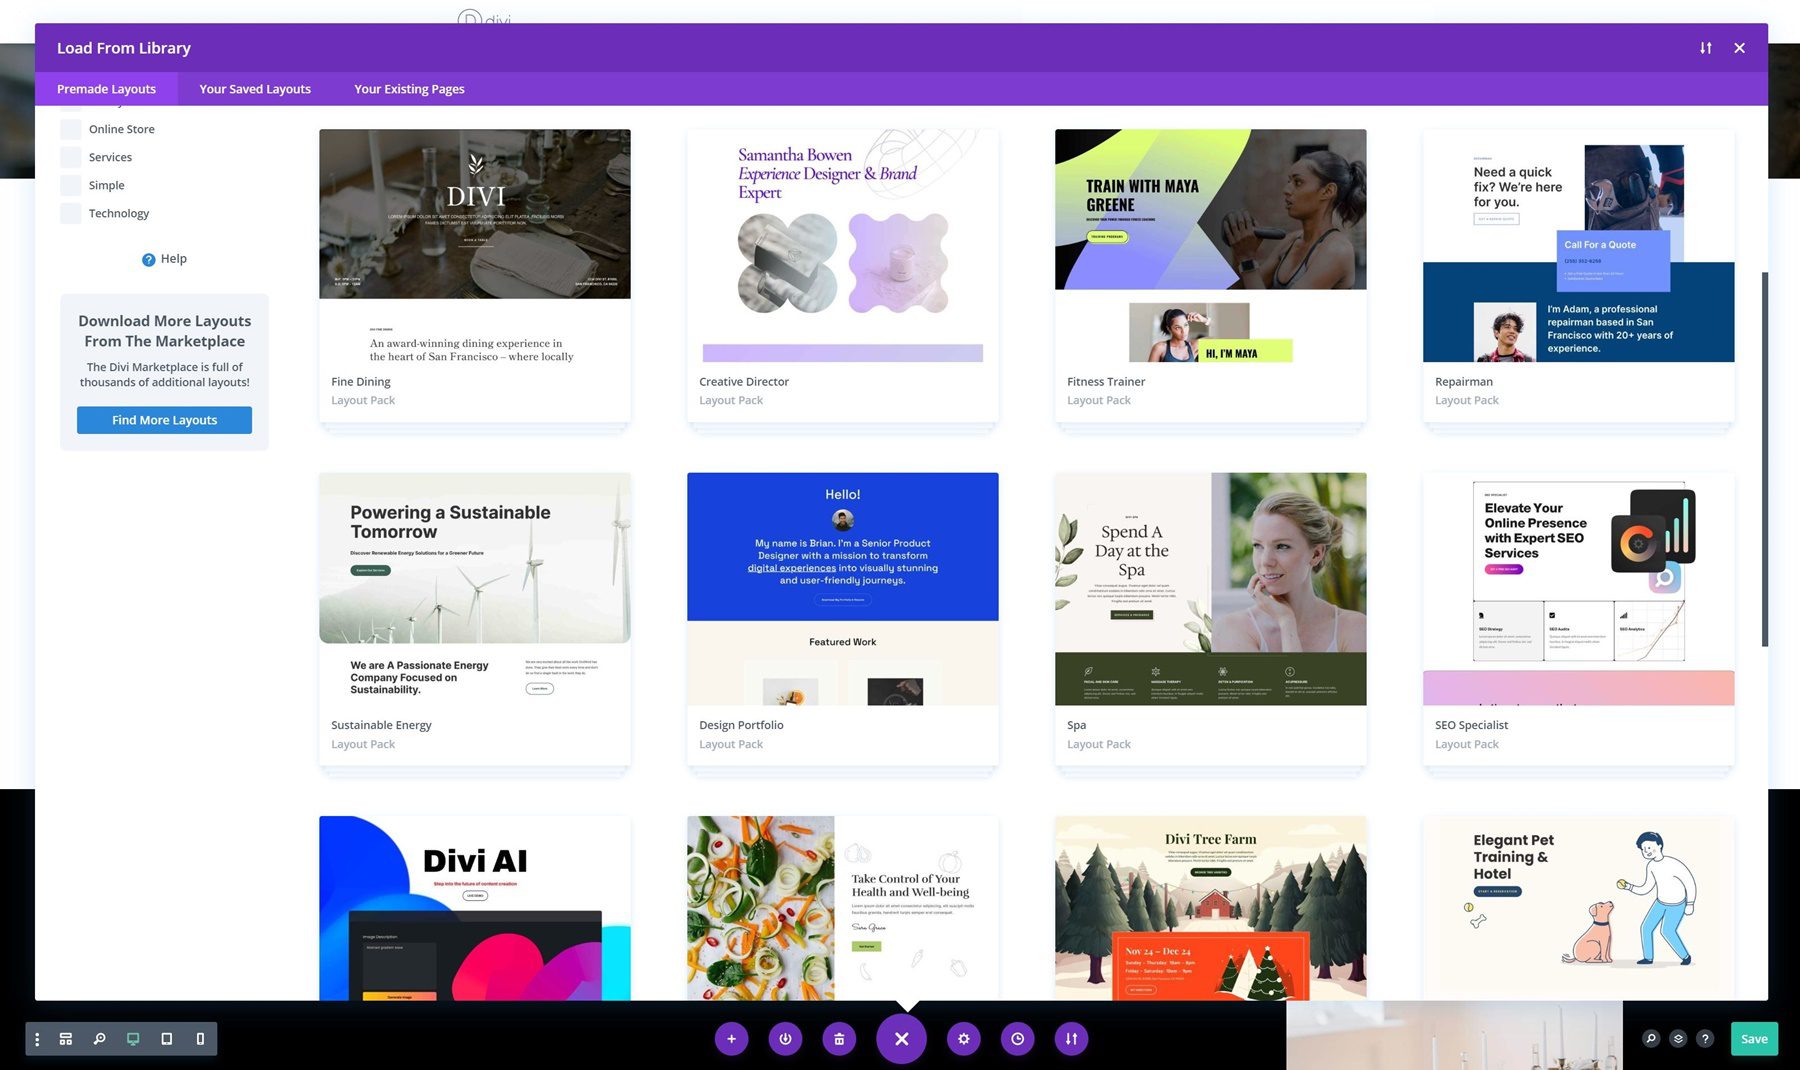 A screenshot of the Divi Layout Pack library